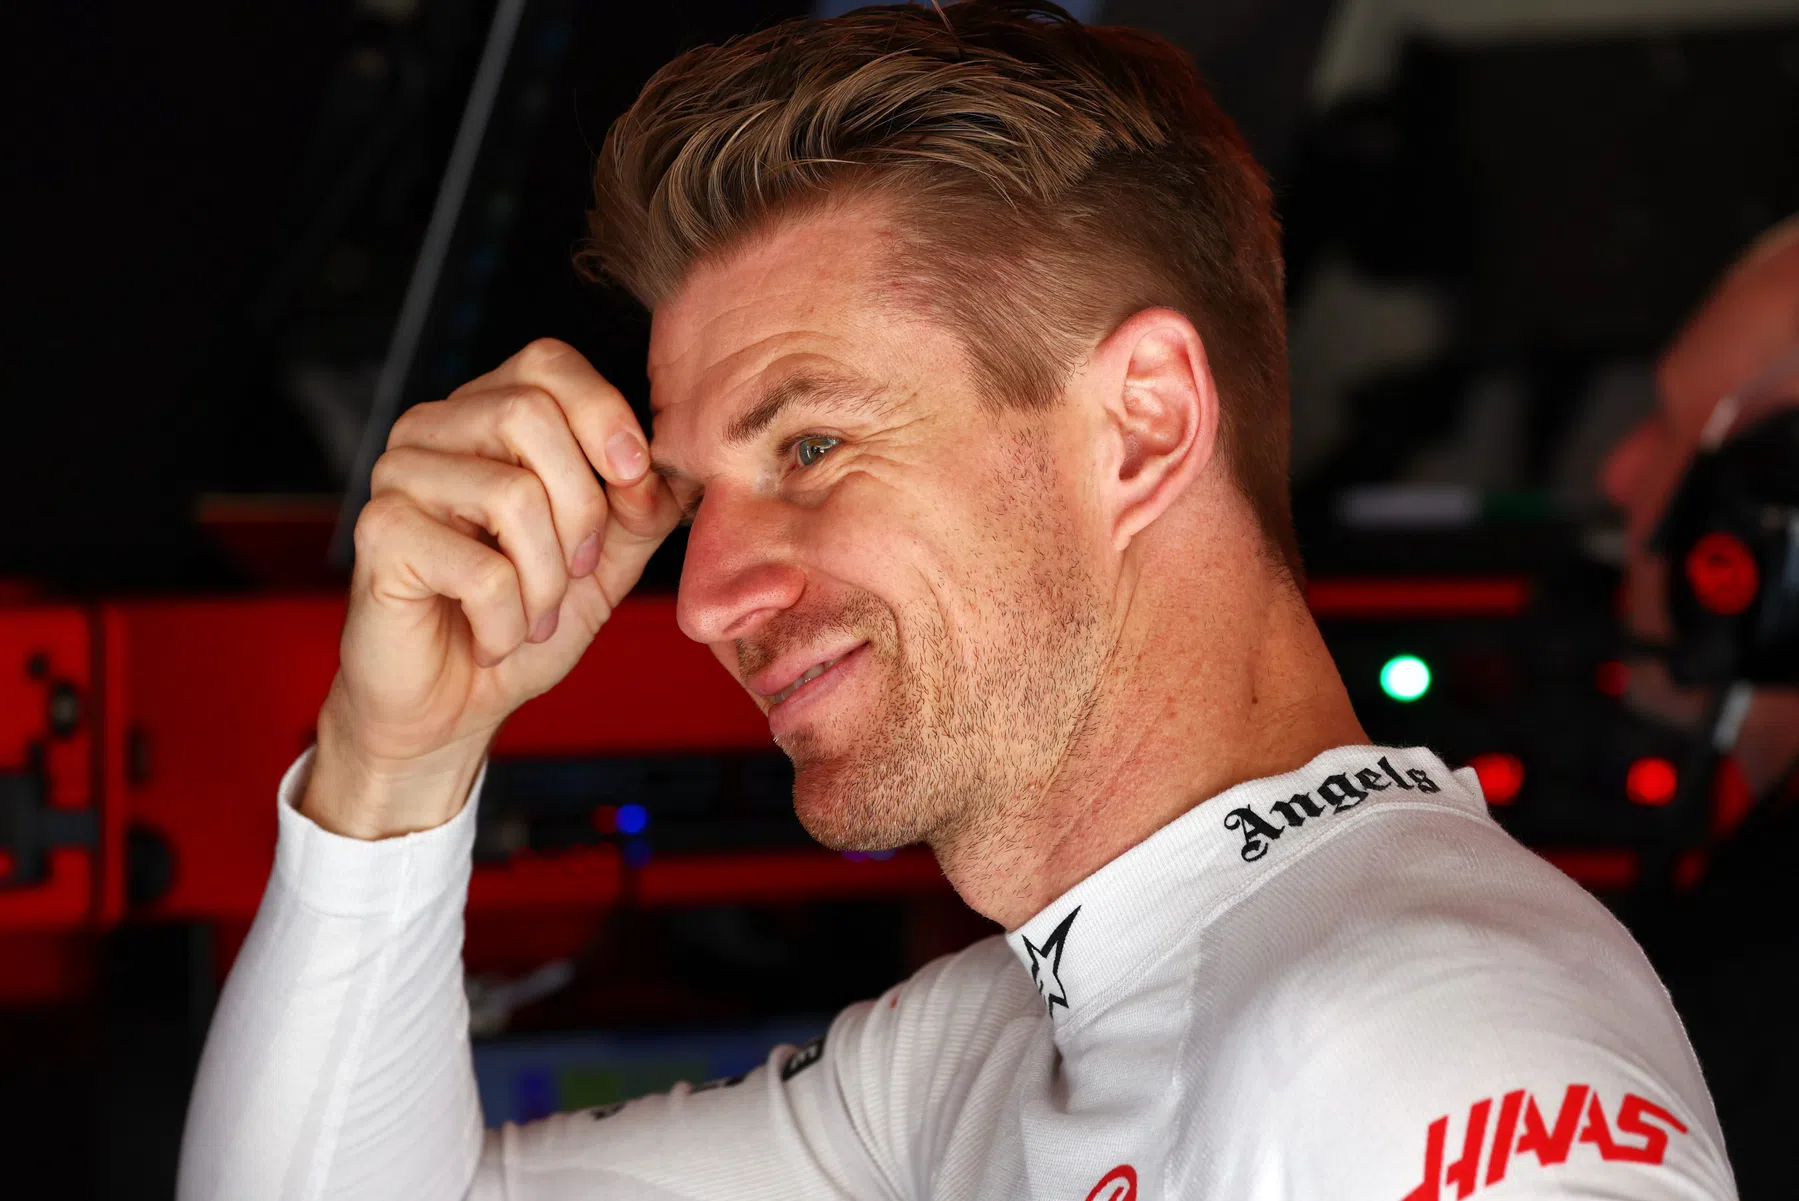 'Audi almost complete with Hulkenberg, time running out for Sainz'